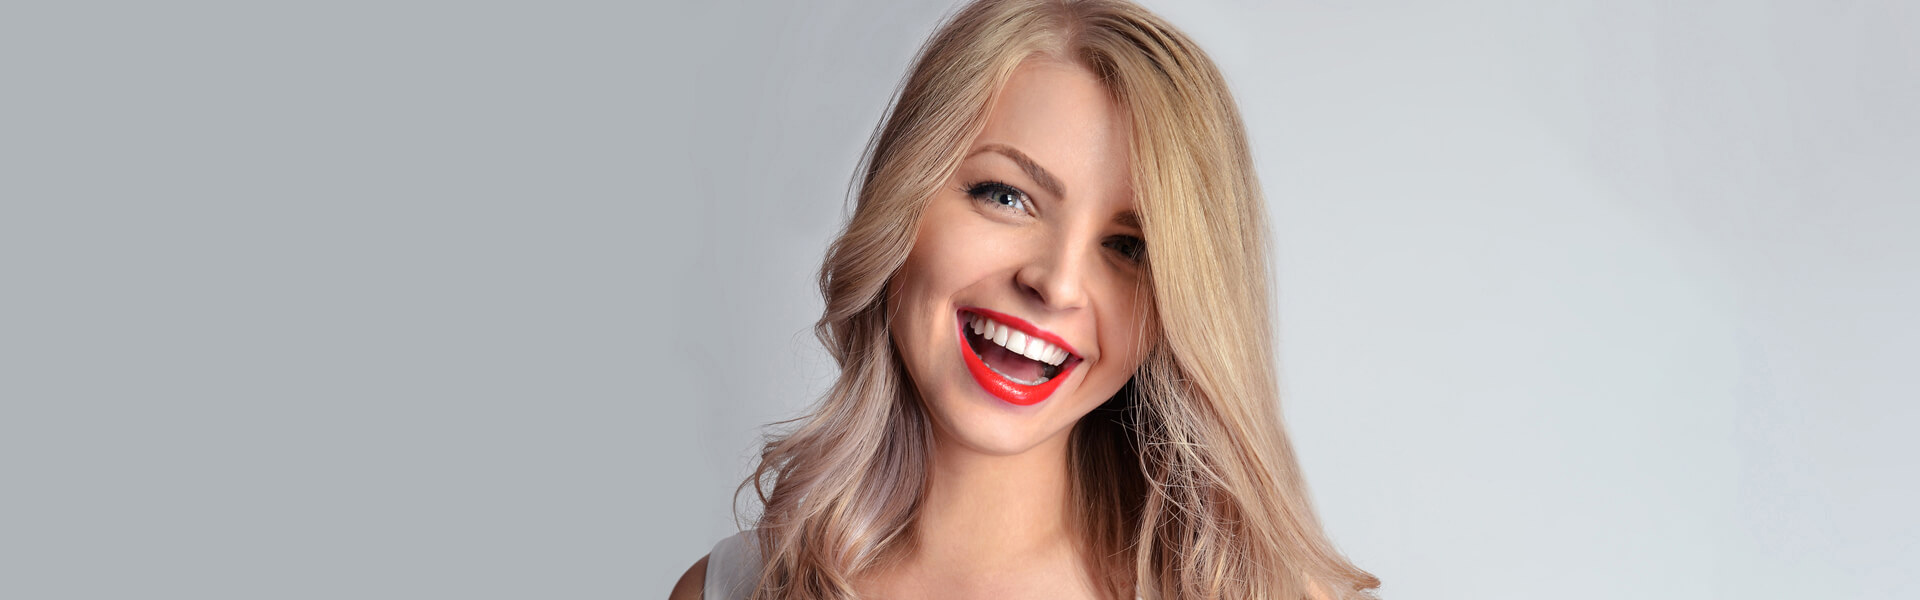 How Teeth Whitening Rids of Tooth Discoloration